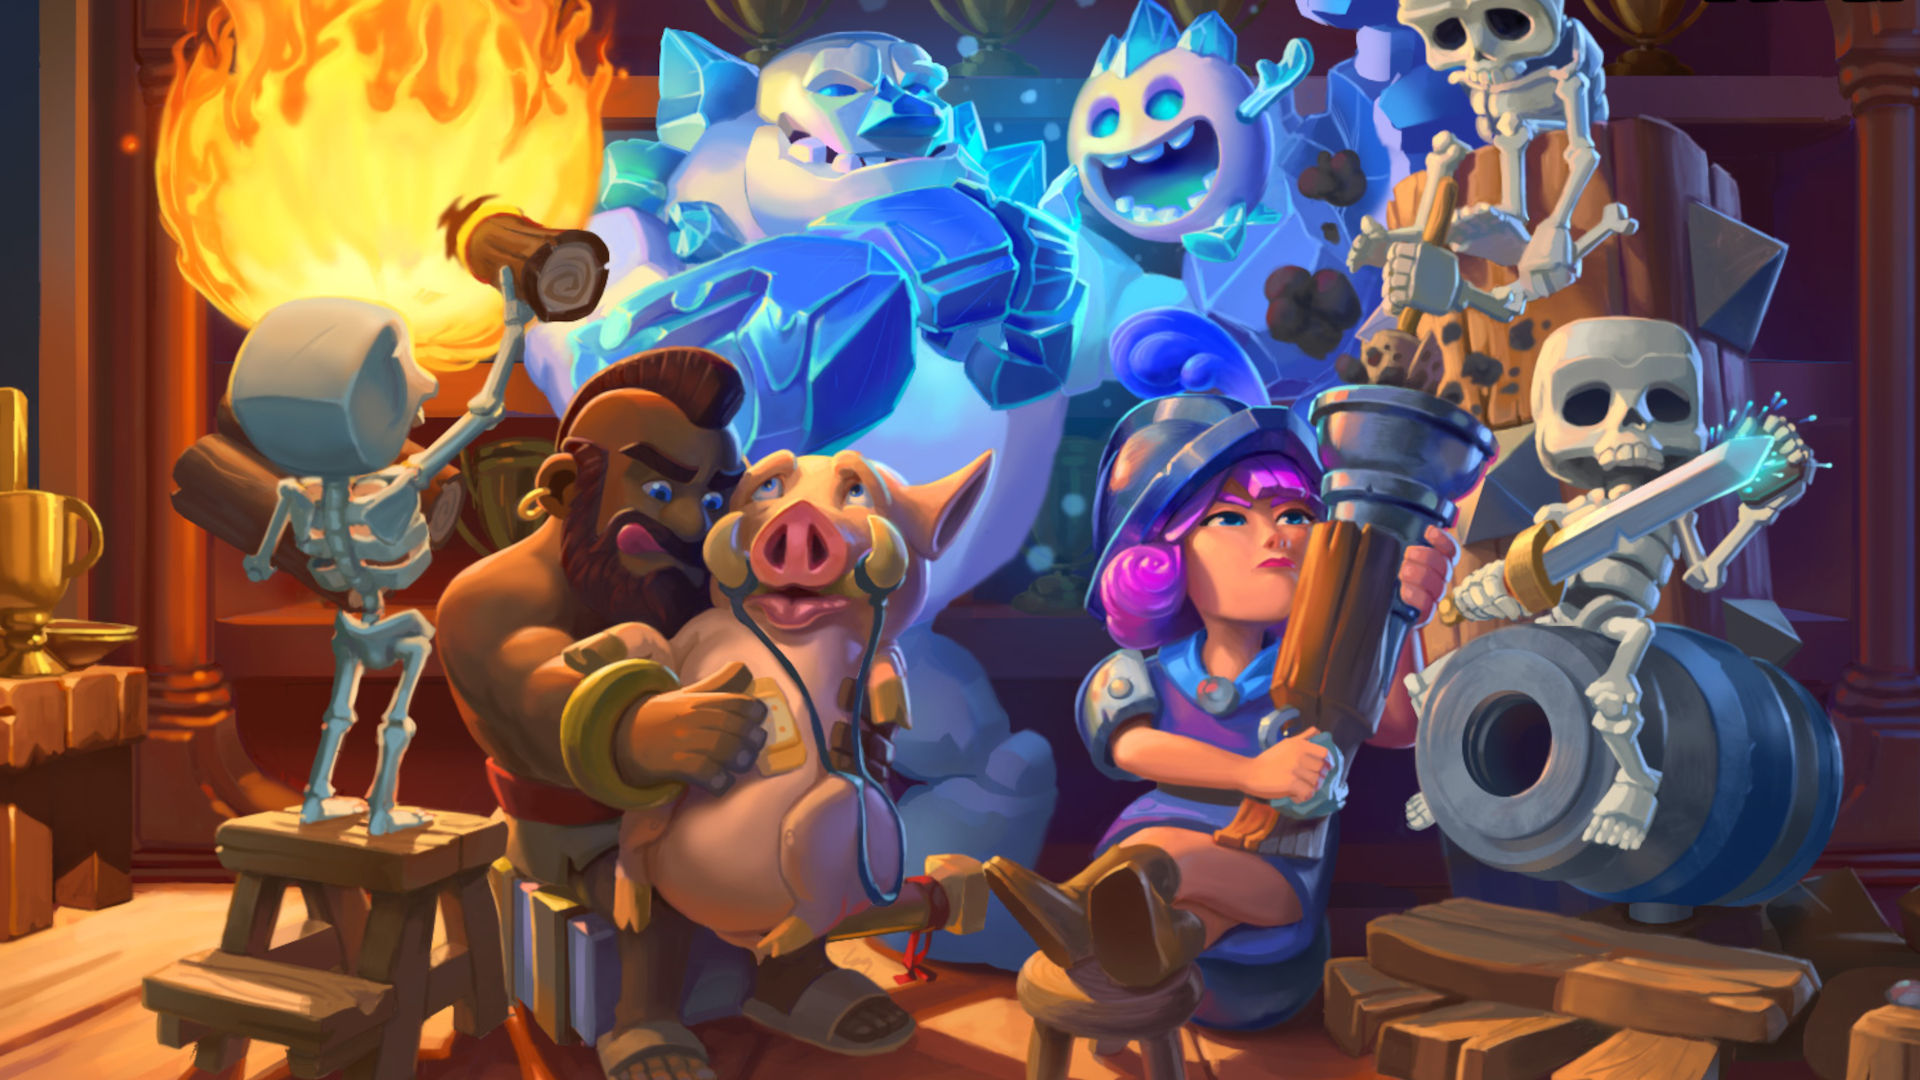 A group of Clash Royale characters sit happily by the fire